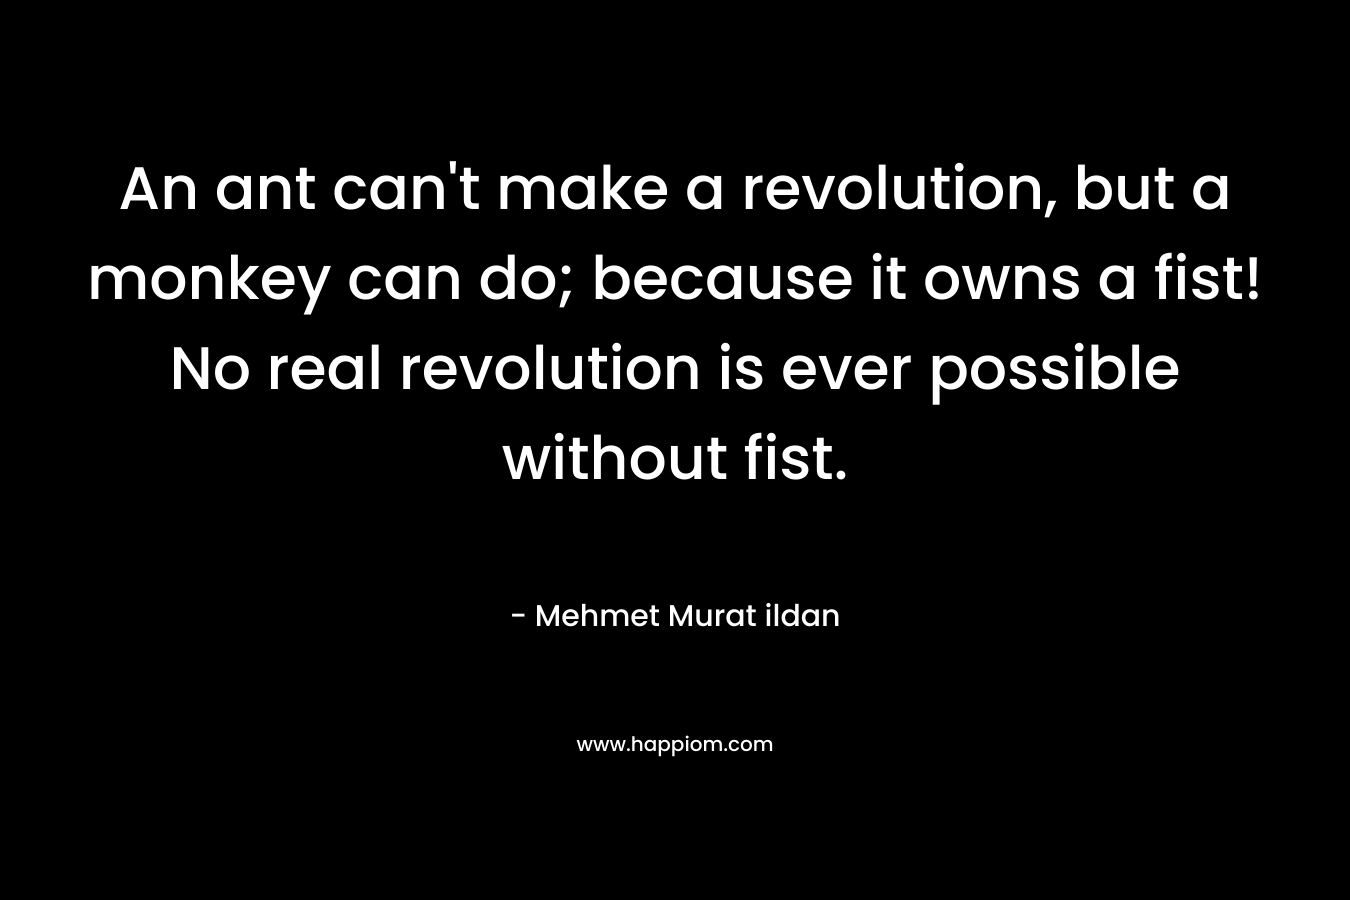 An ant can’t make a revolution, but a monkey can do; because it owns a fist! No real revolution is ever possible without fist. – Mehmet Murat ildan